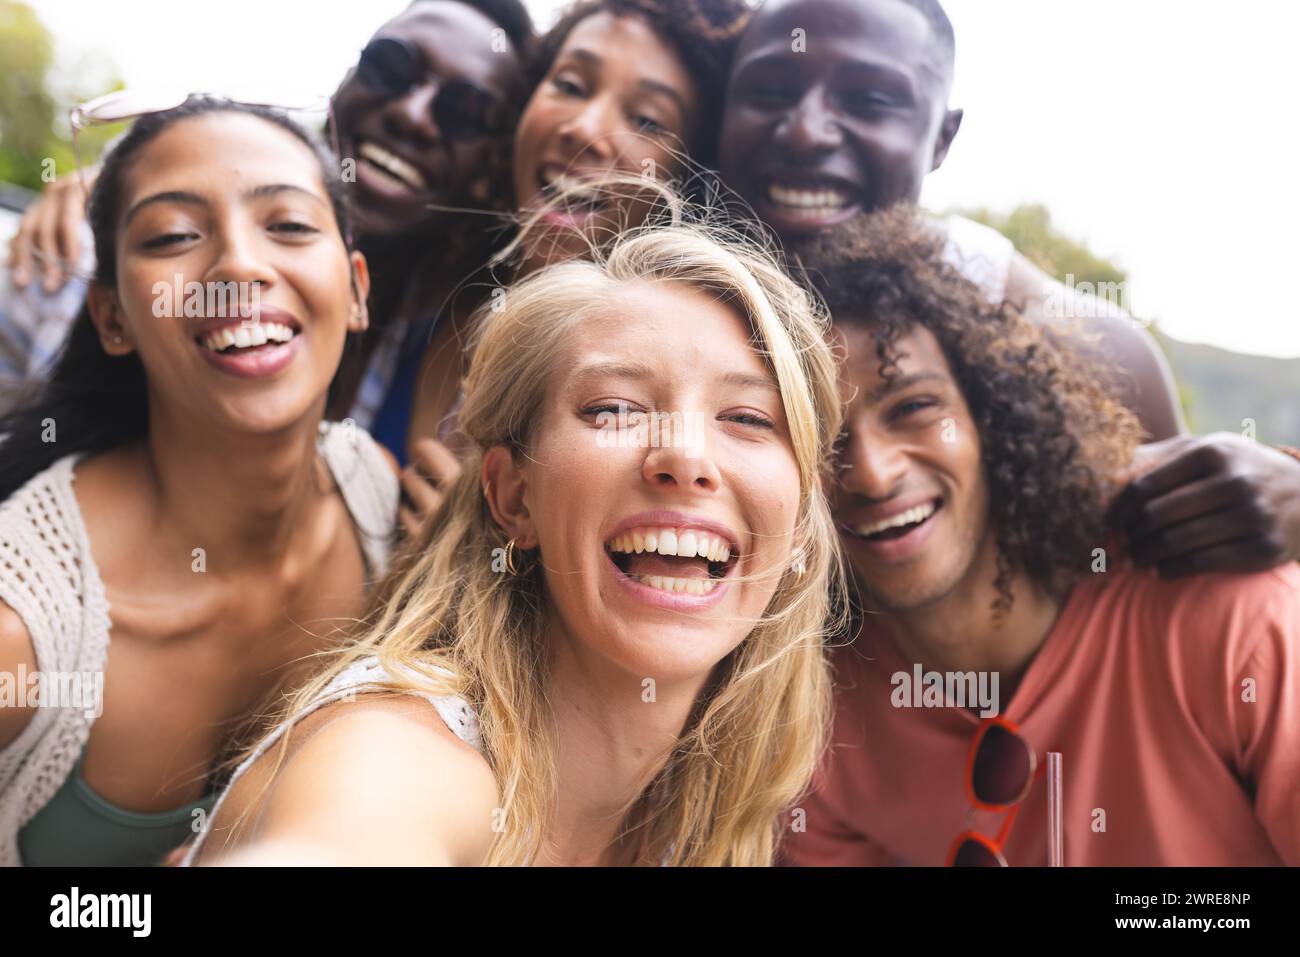 Diverse group of friends taking selfie, huddled close with wide smiles Stock Photo